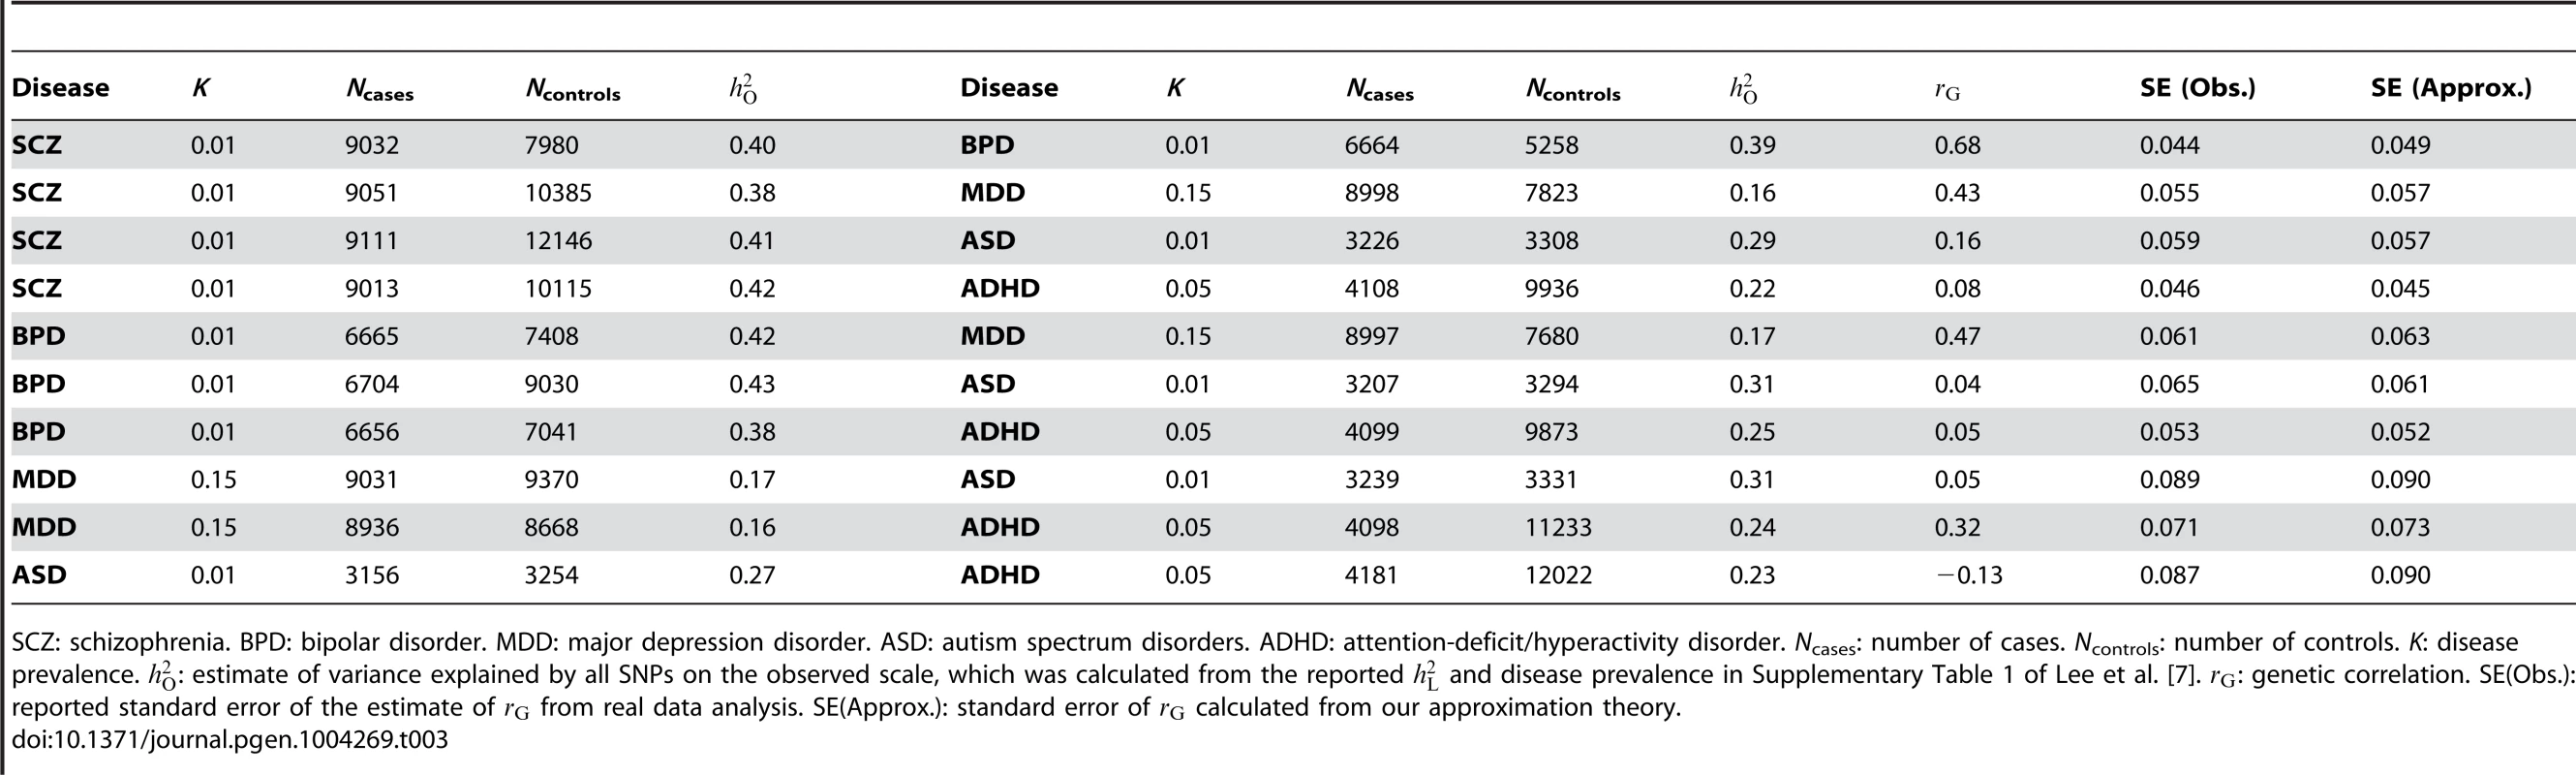 Standard errors of the estimates of genetic correlations from published bivariate analyses of case-control studies for psychiatric diseases <em class=&quot;ref&quot;>[7]</em> vs. those predicted from the approximation theory.